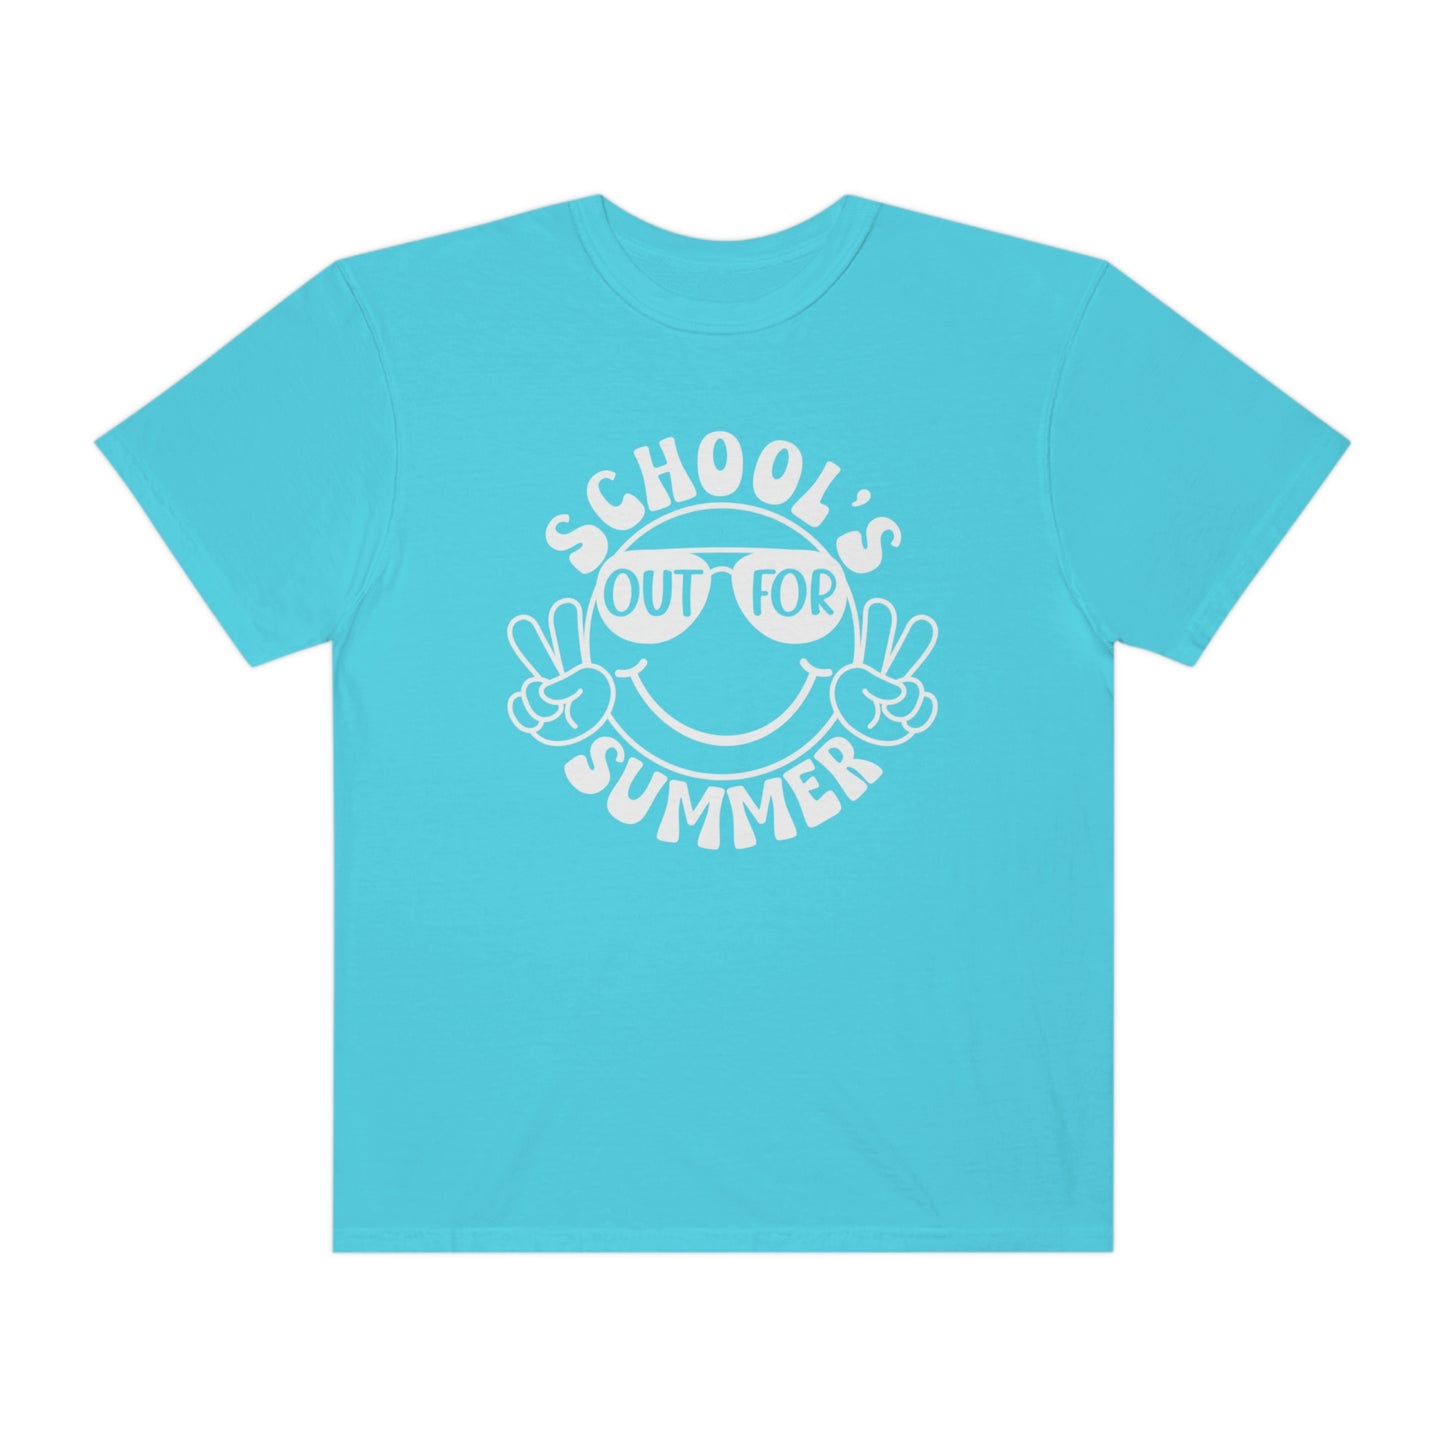 School's Out For Summer Comfort Colors T-Shirt